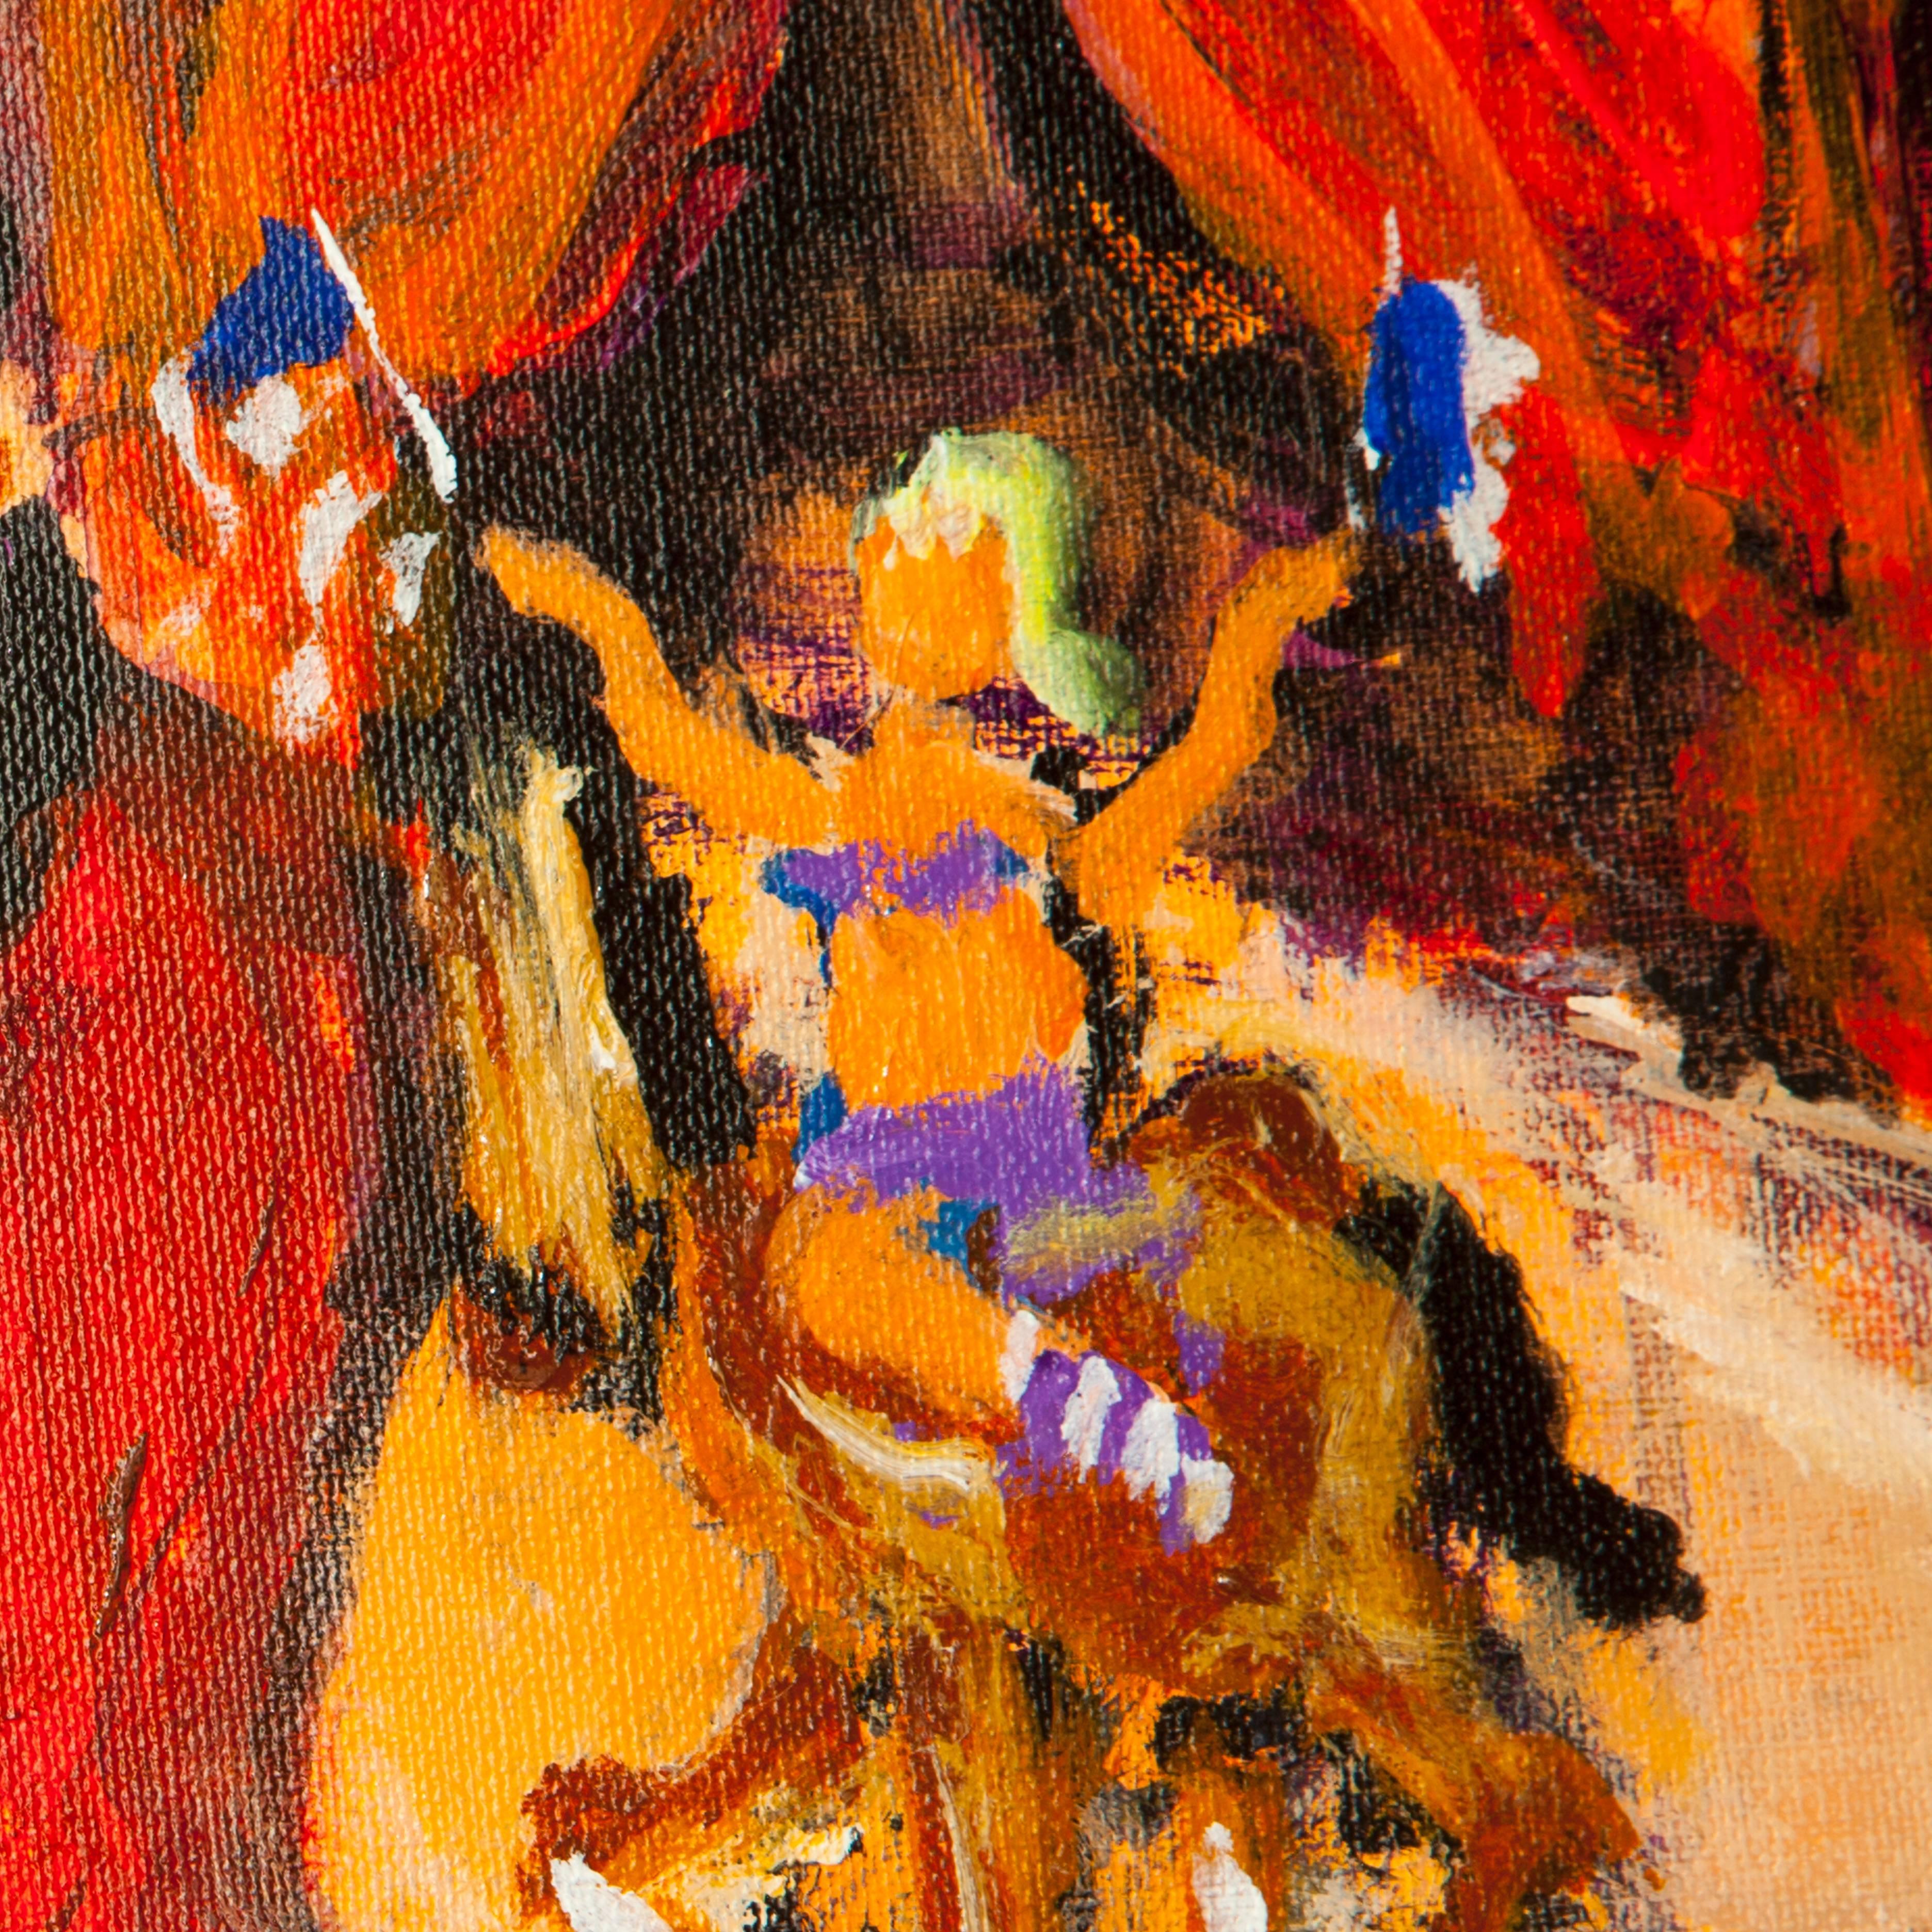 Signed original acrylic by Urban Huchet (French, 1930-2014). This acrylic on canvas was painted in his Paris Studio. 

Au Cirque is a wonderful representation of the circus in full swing, complete with the ring master in read wearing a top hat and